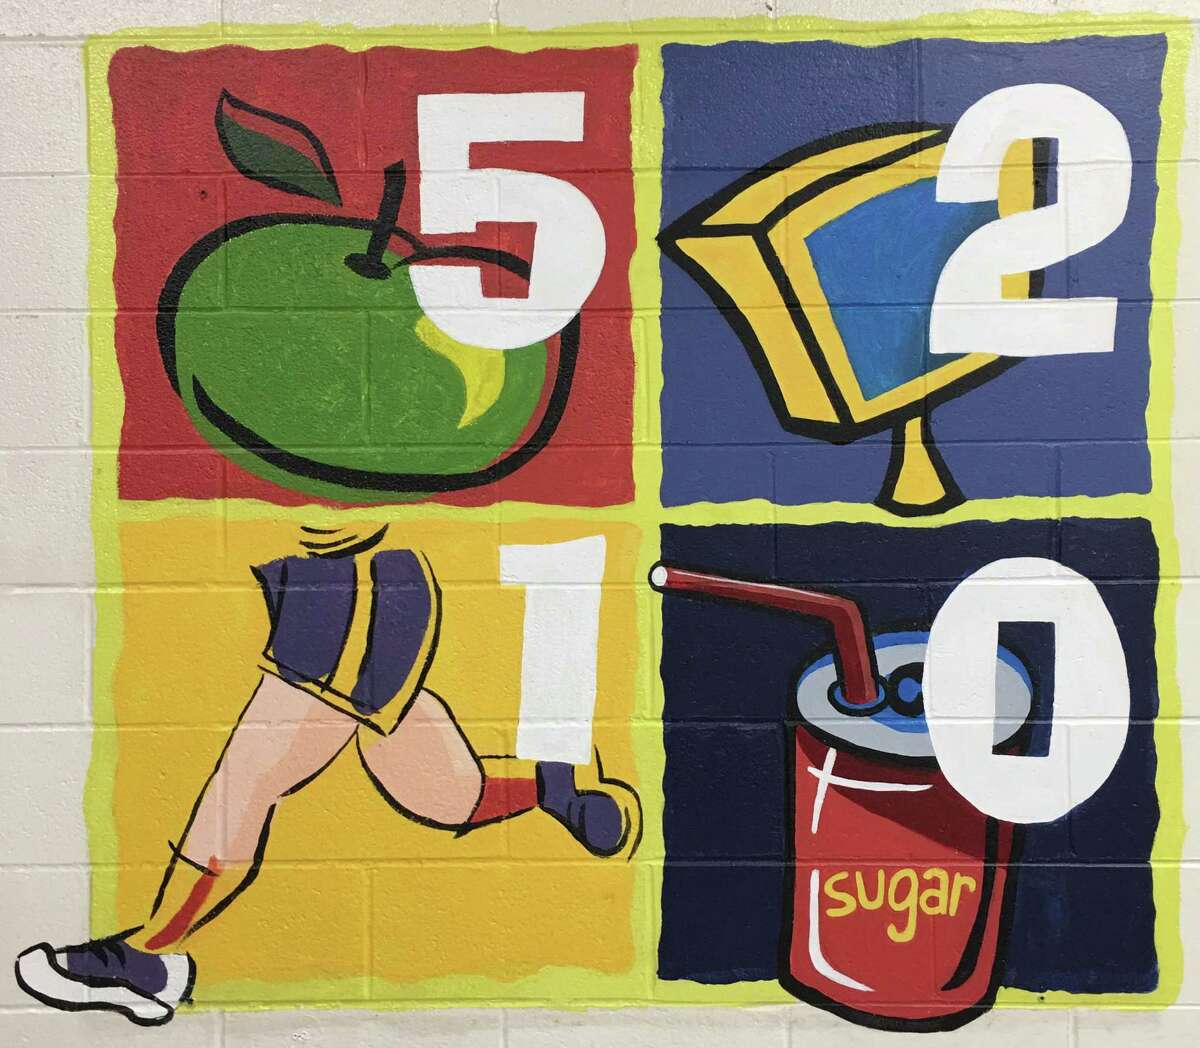 A mural encouraging students to eat healthily and stay physically active has been painted onto the cafeteria wall at Morris Street Elementary School in Danbury. The mural is part of Go! 5-2-1-0, a wellness message funded through the Anthem Foundation and promoted by the Regional YMCA of Western Connecticut.